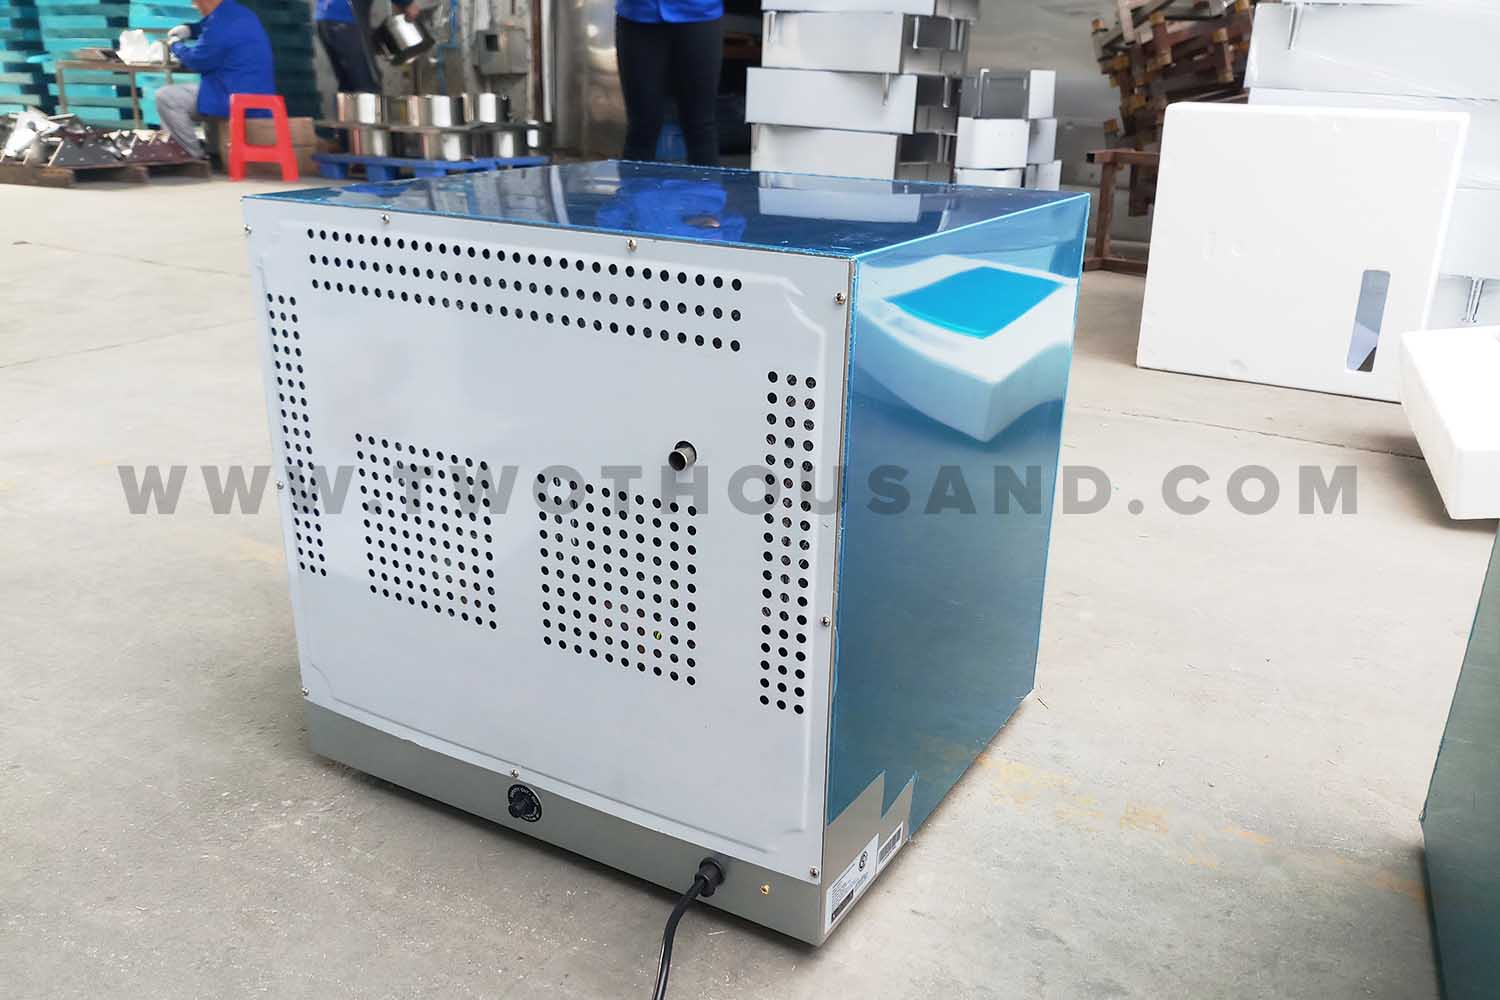 More View of Electric Convection Oven